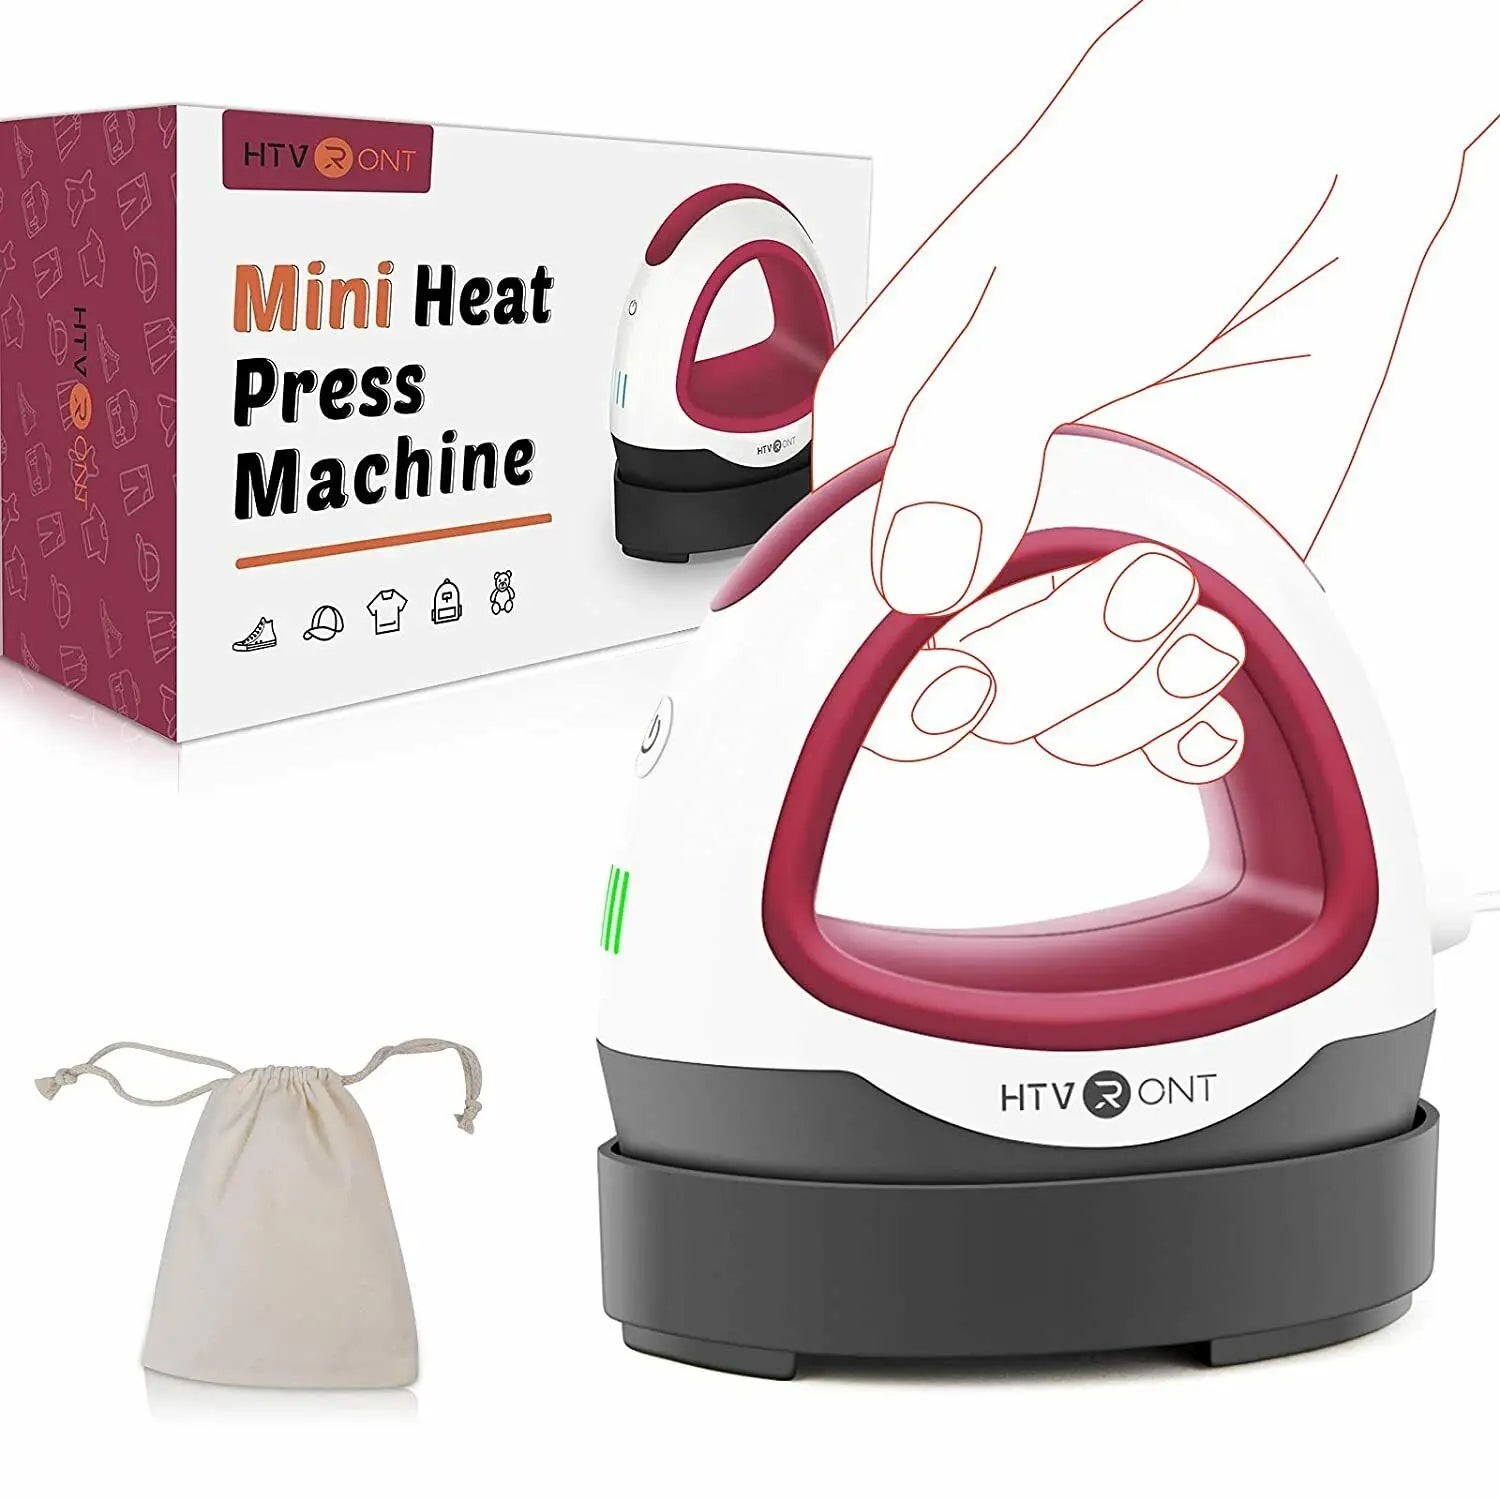 Cloud Discoveries Mini Heat Press Machine - DIY T-shirt Printing - Heat Transfer Iron - Custom Clothing and Crafts - Fast Heating - Safe Auto-Off - Ideal for T-shirts, Bags, Hats - Available with EU/US/UK/AU Plugs